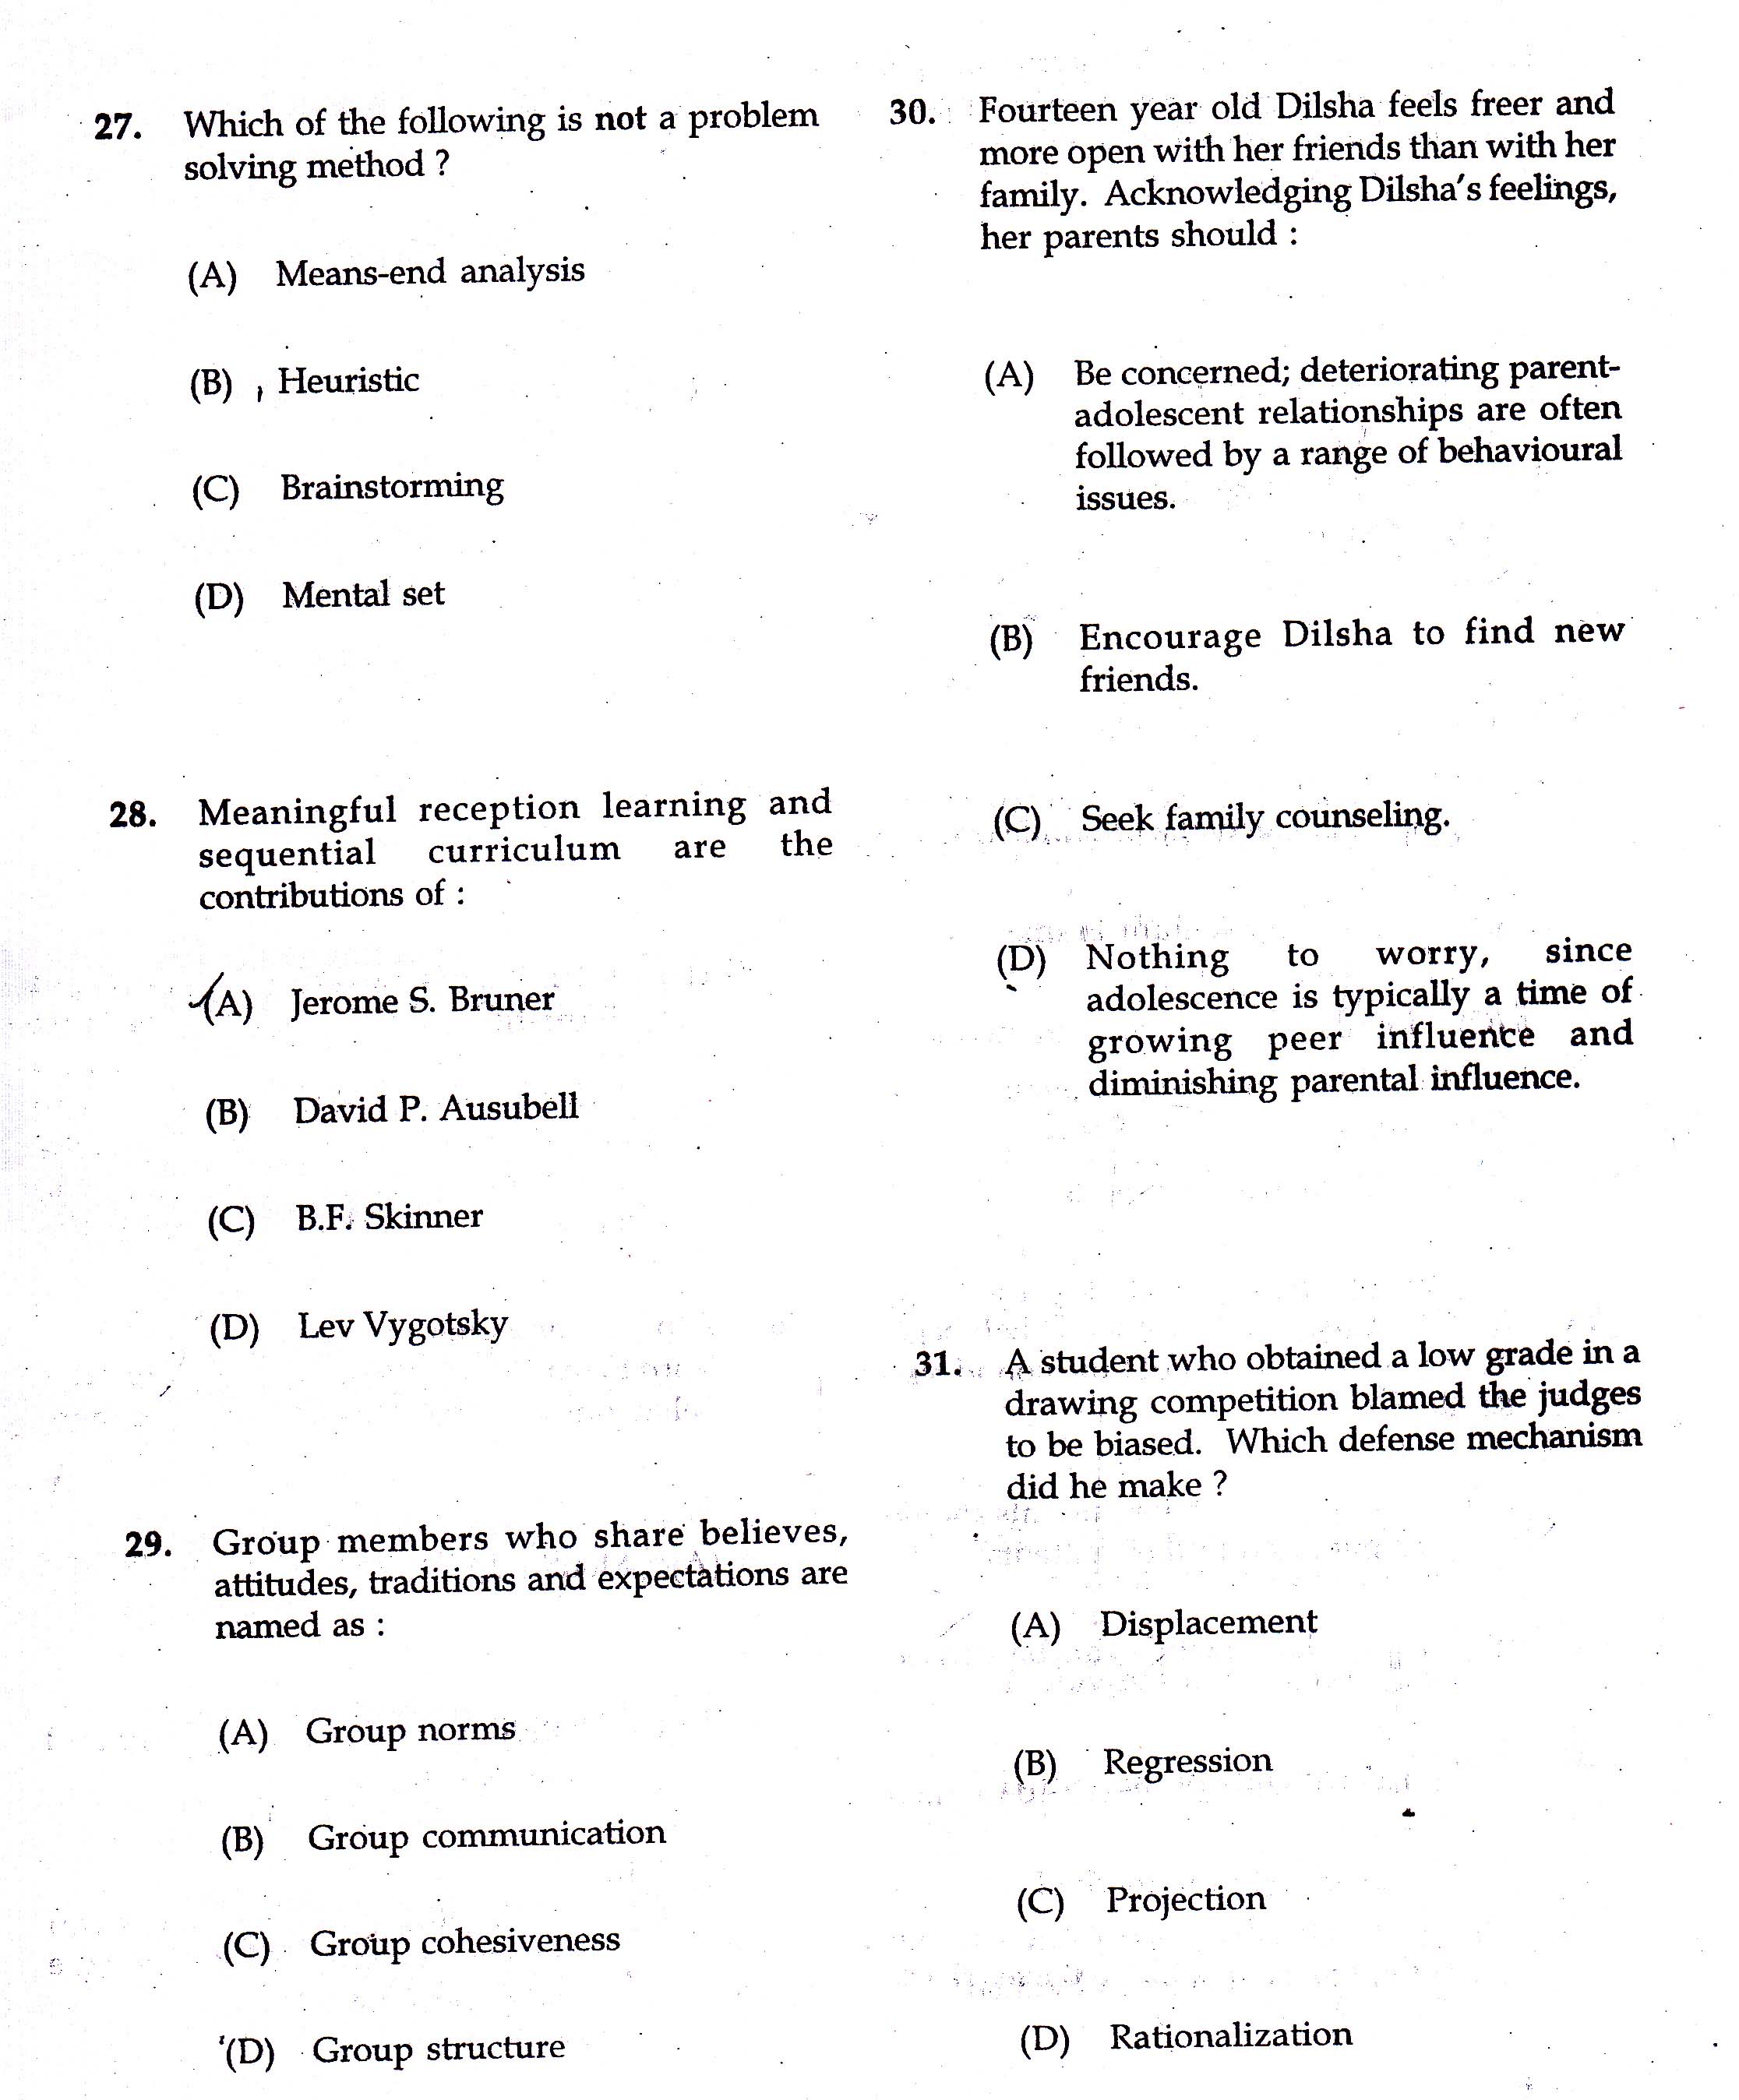 KTET Category III Part 1 Adolescent Psychology Question Paper with Answers 2017 5